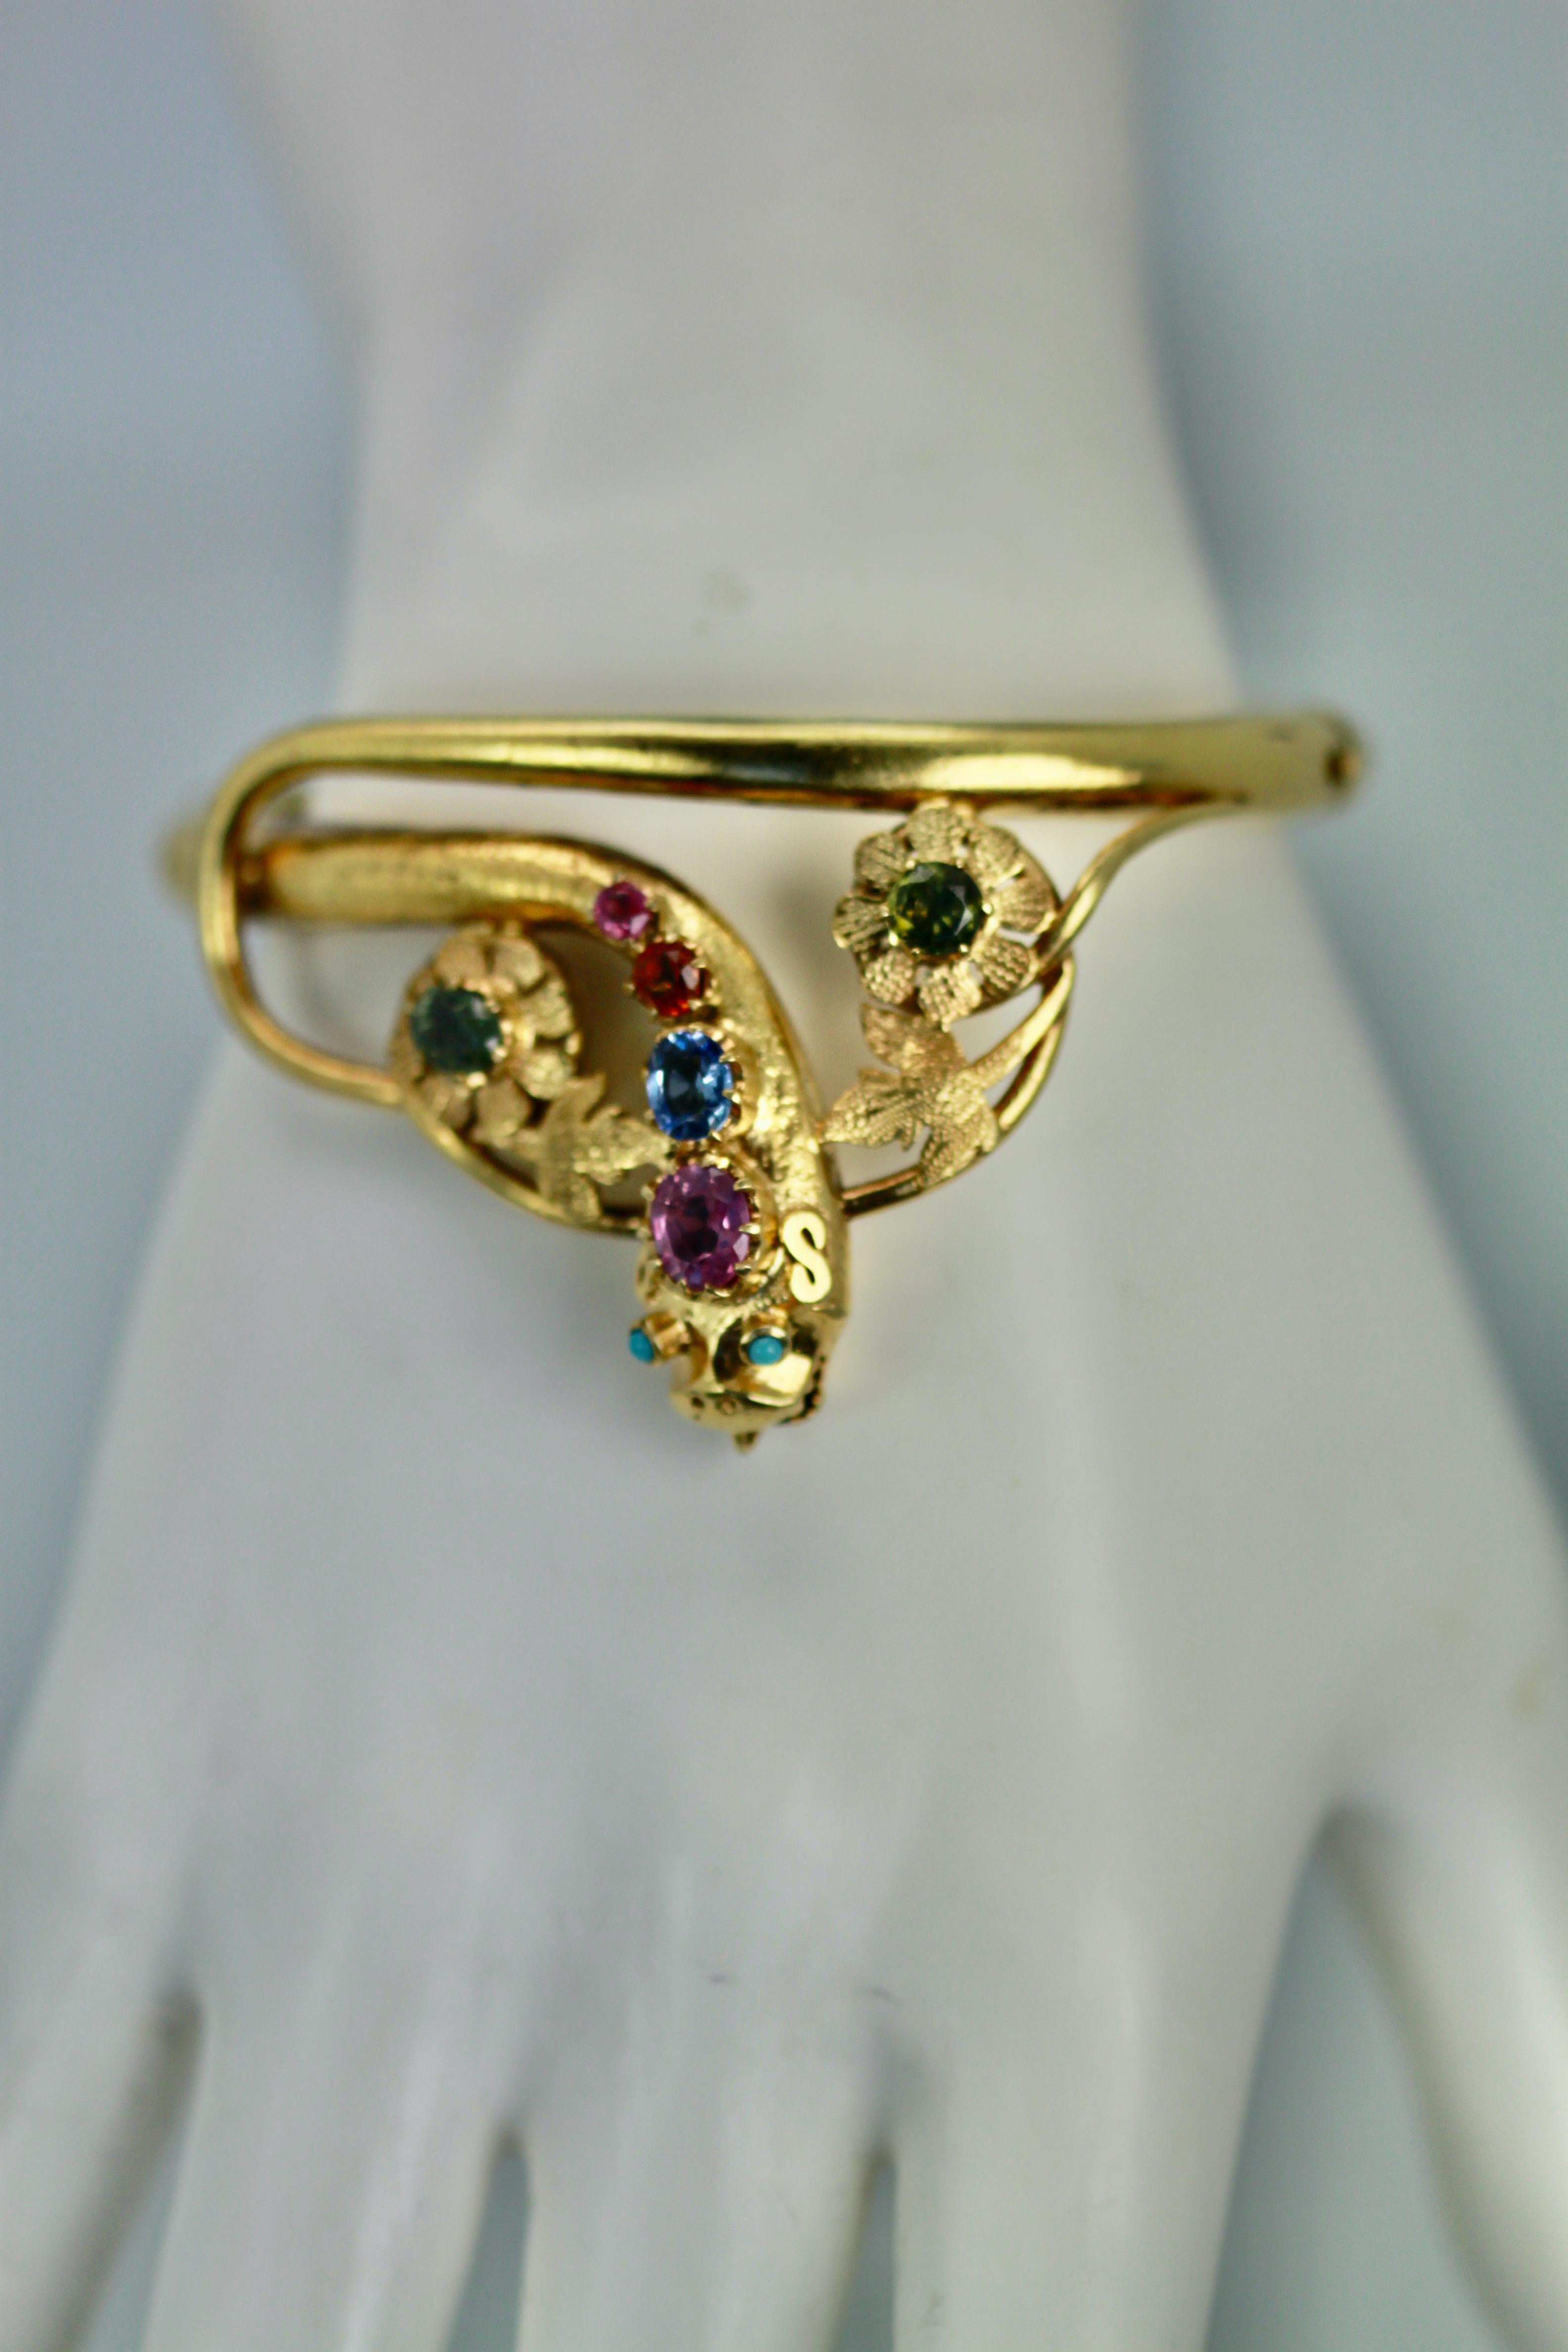 This unusual snake bracelet is set with multi-colored Sapphires and is quite special.  This bracelet is done in 14K yellow gold and set with a cushion cut Blue Sapphire, Pink, Orange Sapphires to the head and body.  Cabochon Turquoise eyes and Green